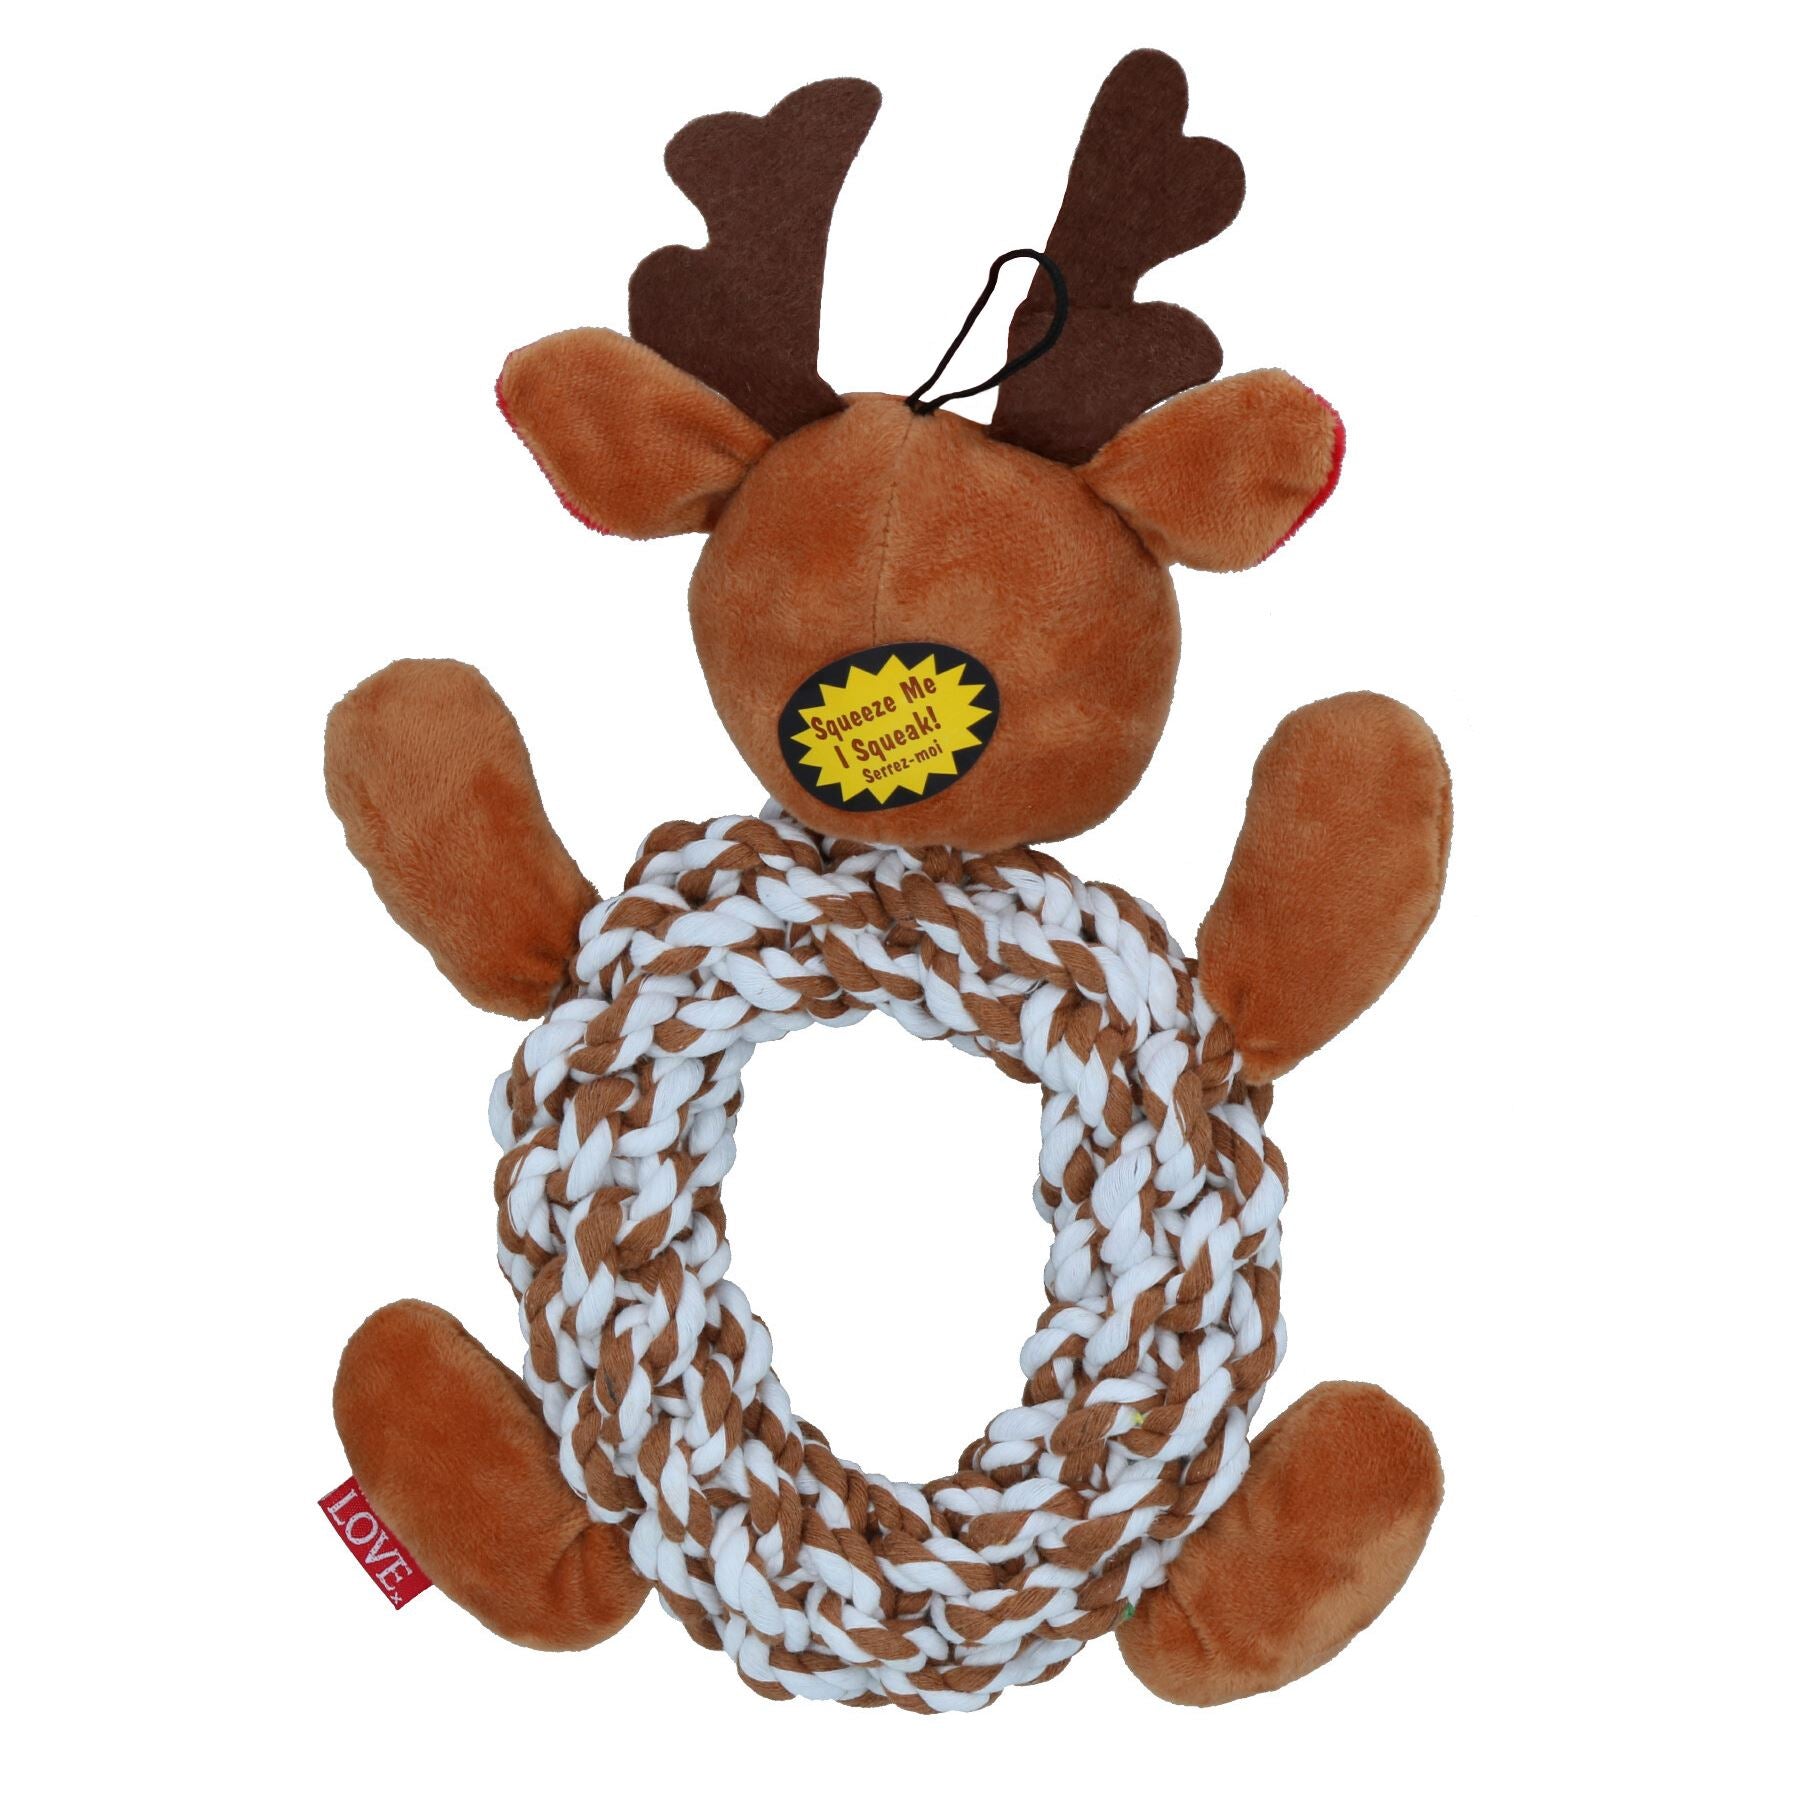 Dog Christmas Gift Knottie Ring Reindeer Squeaky Plush Rope Play Toy Present